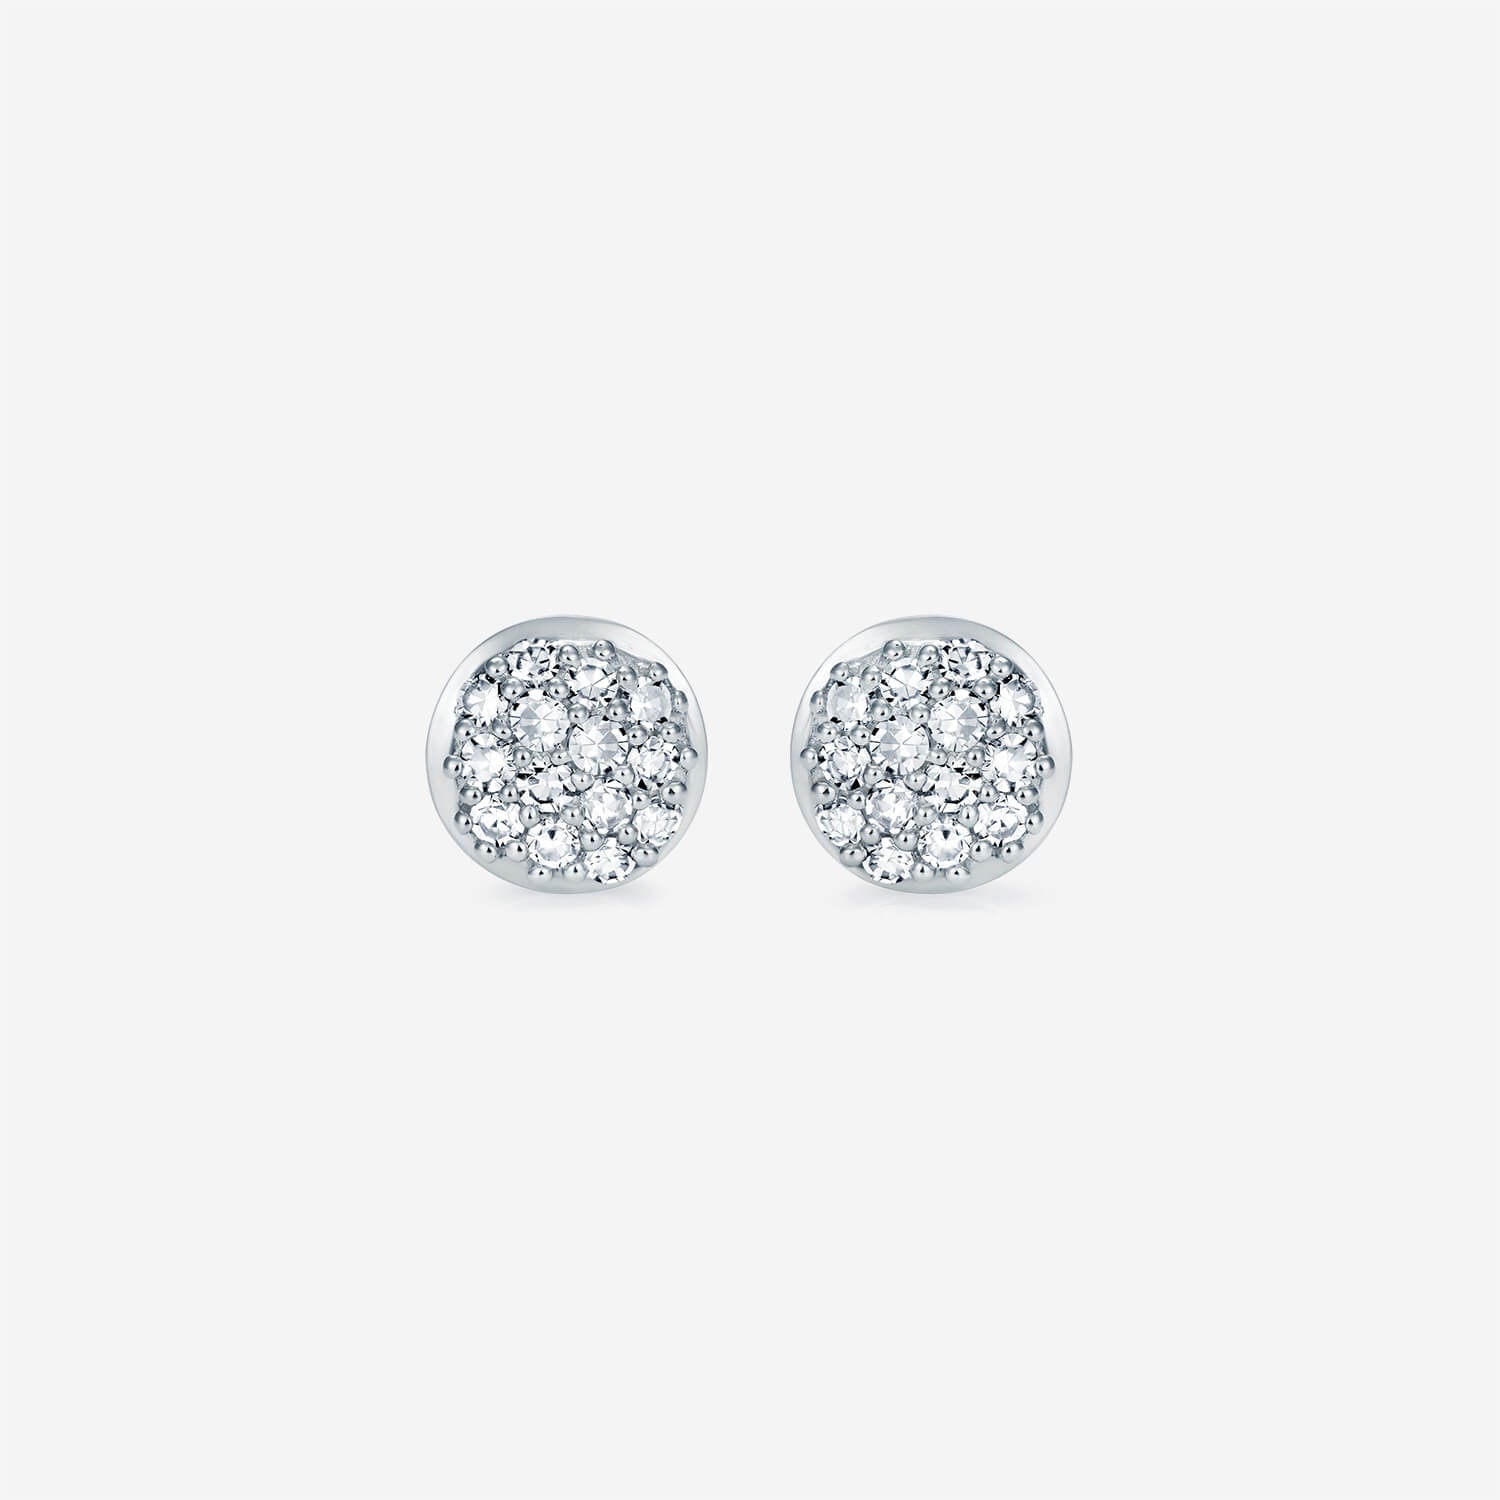 886 Royal Mint Earrings 886 Pavé Studs in 18ct White Gold